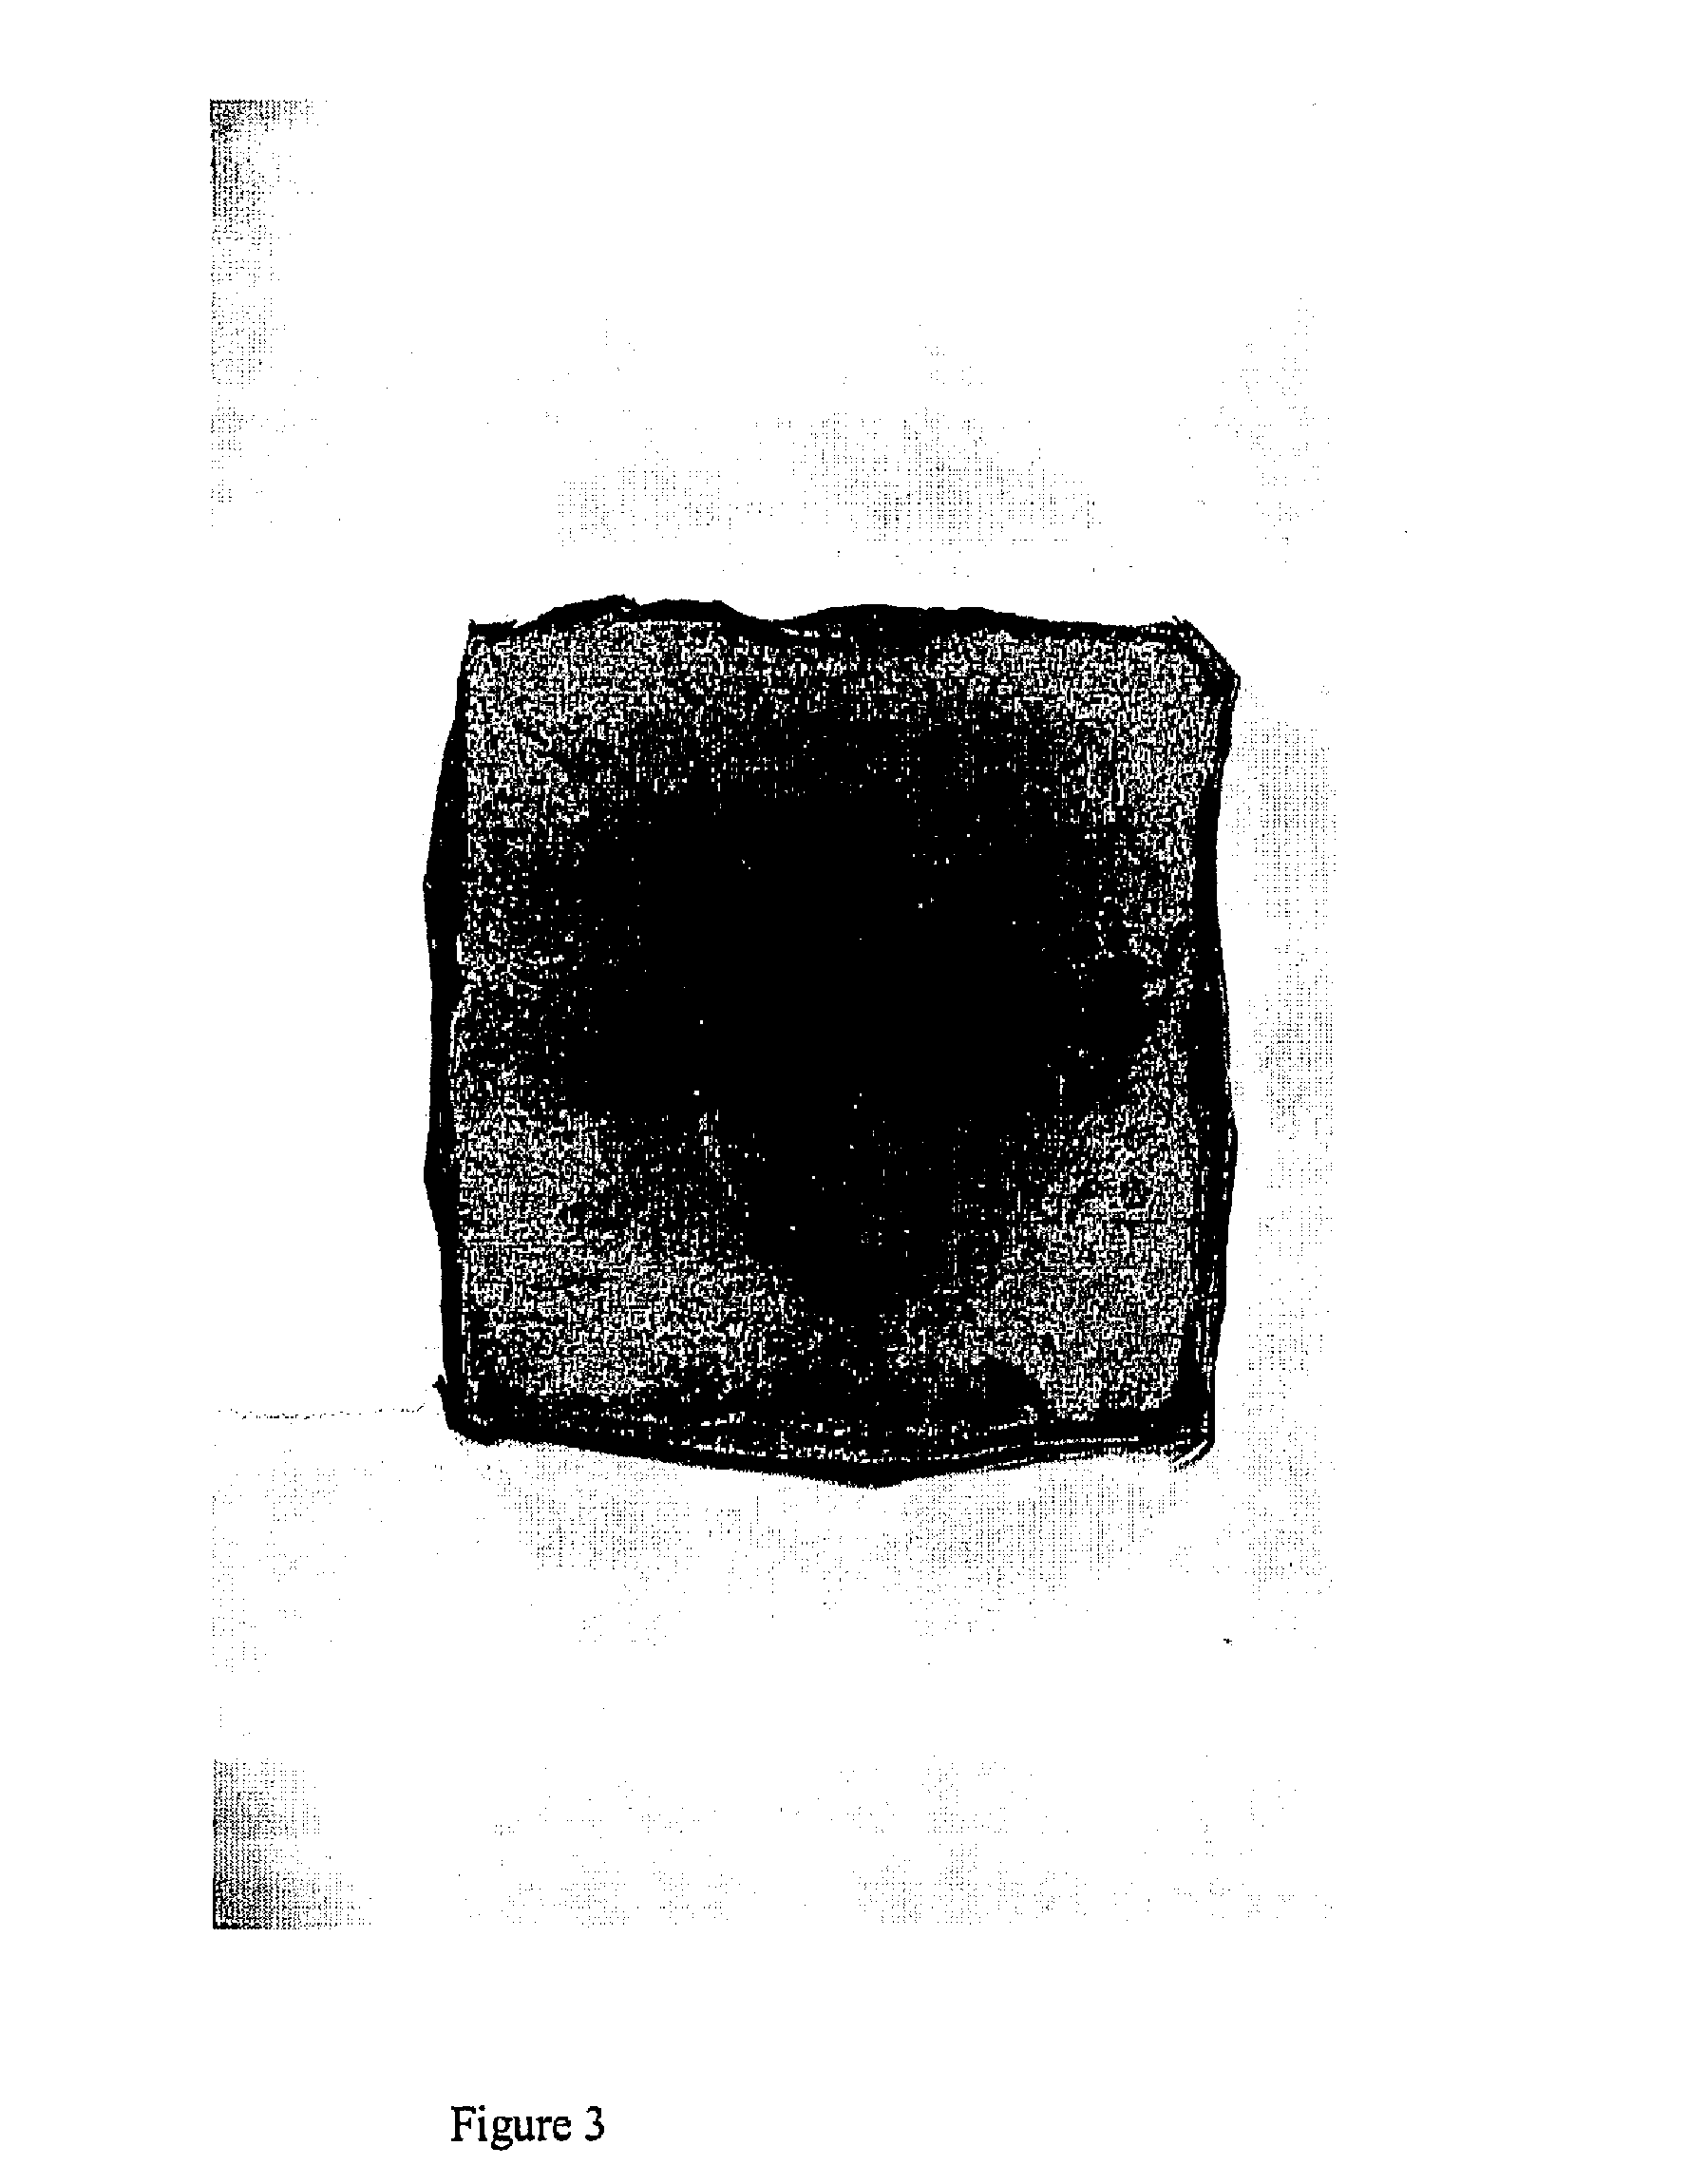 Polyolefin flame retardant composition and synergists thereof